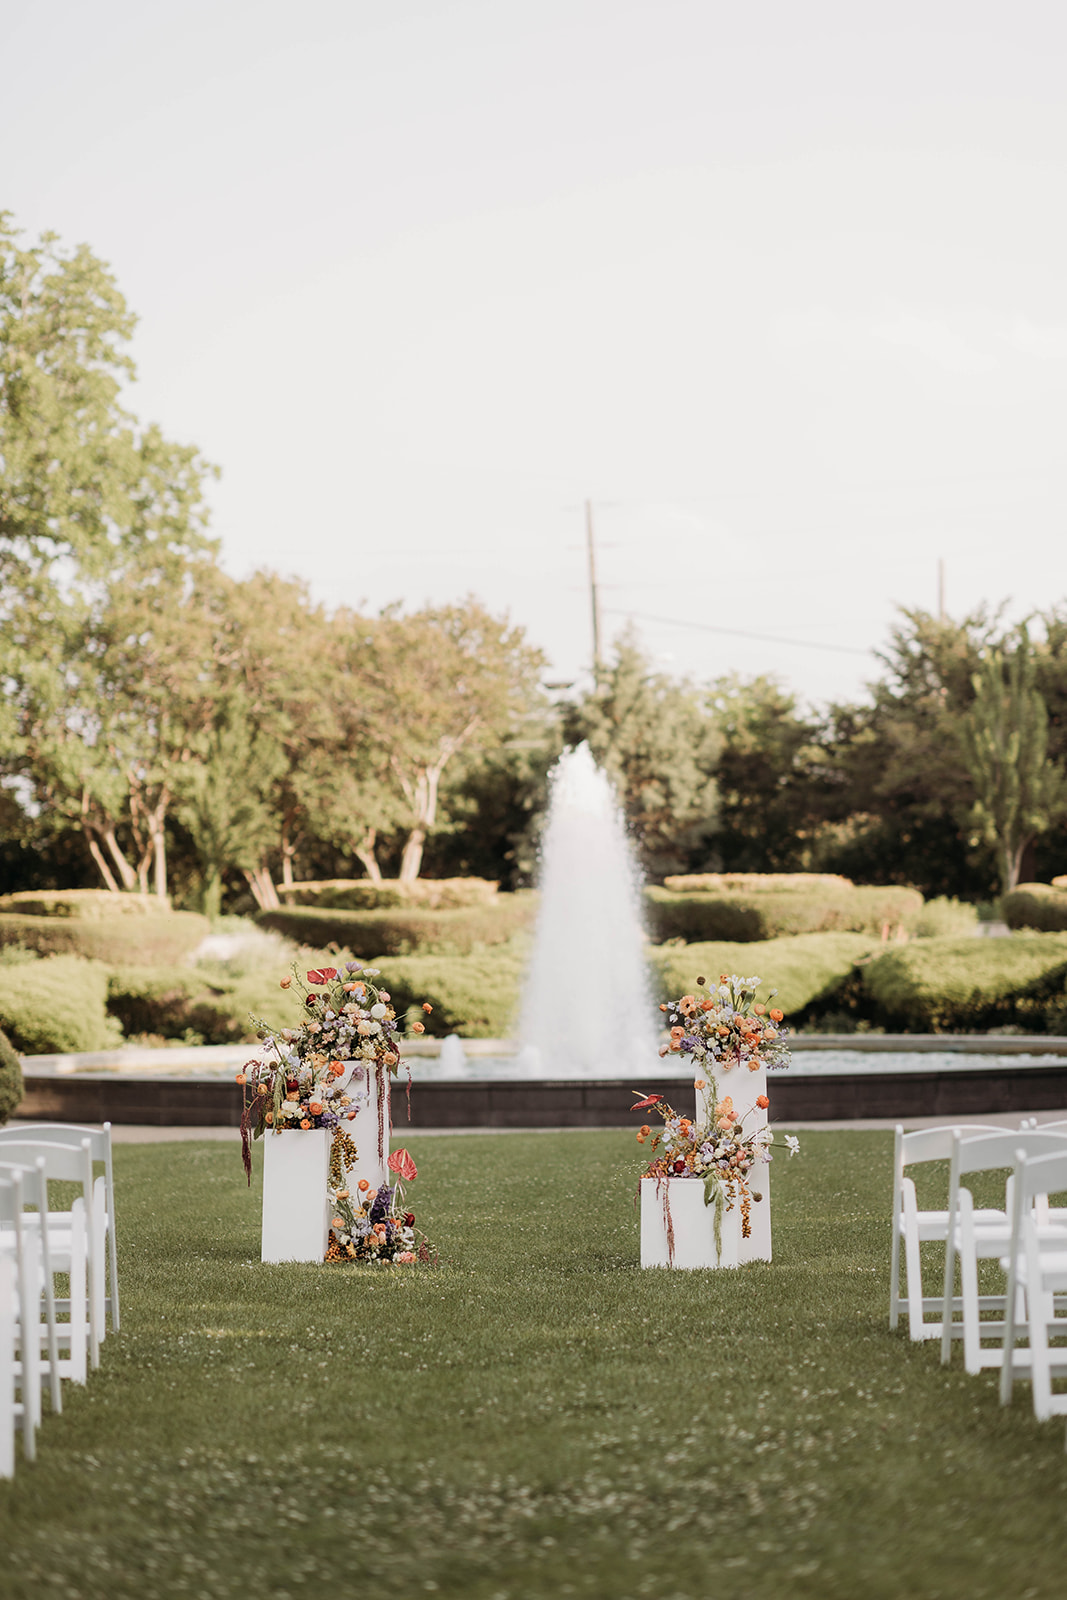 A spring festival style wedding with colorful accents and nostalgic dresses at Texas Discovery Gardens